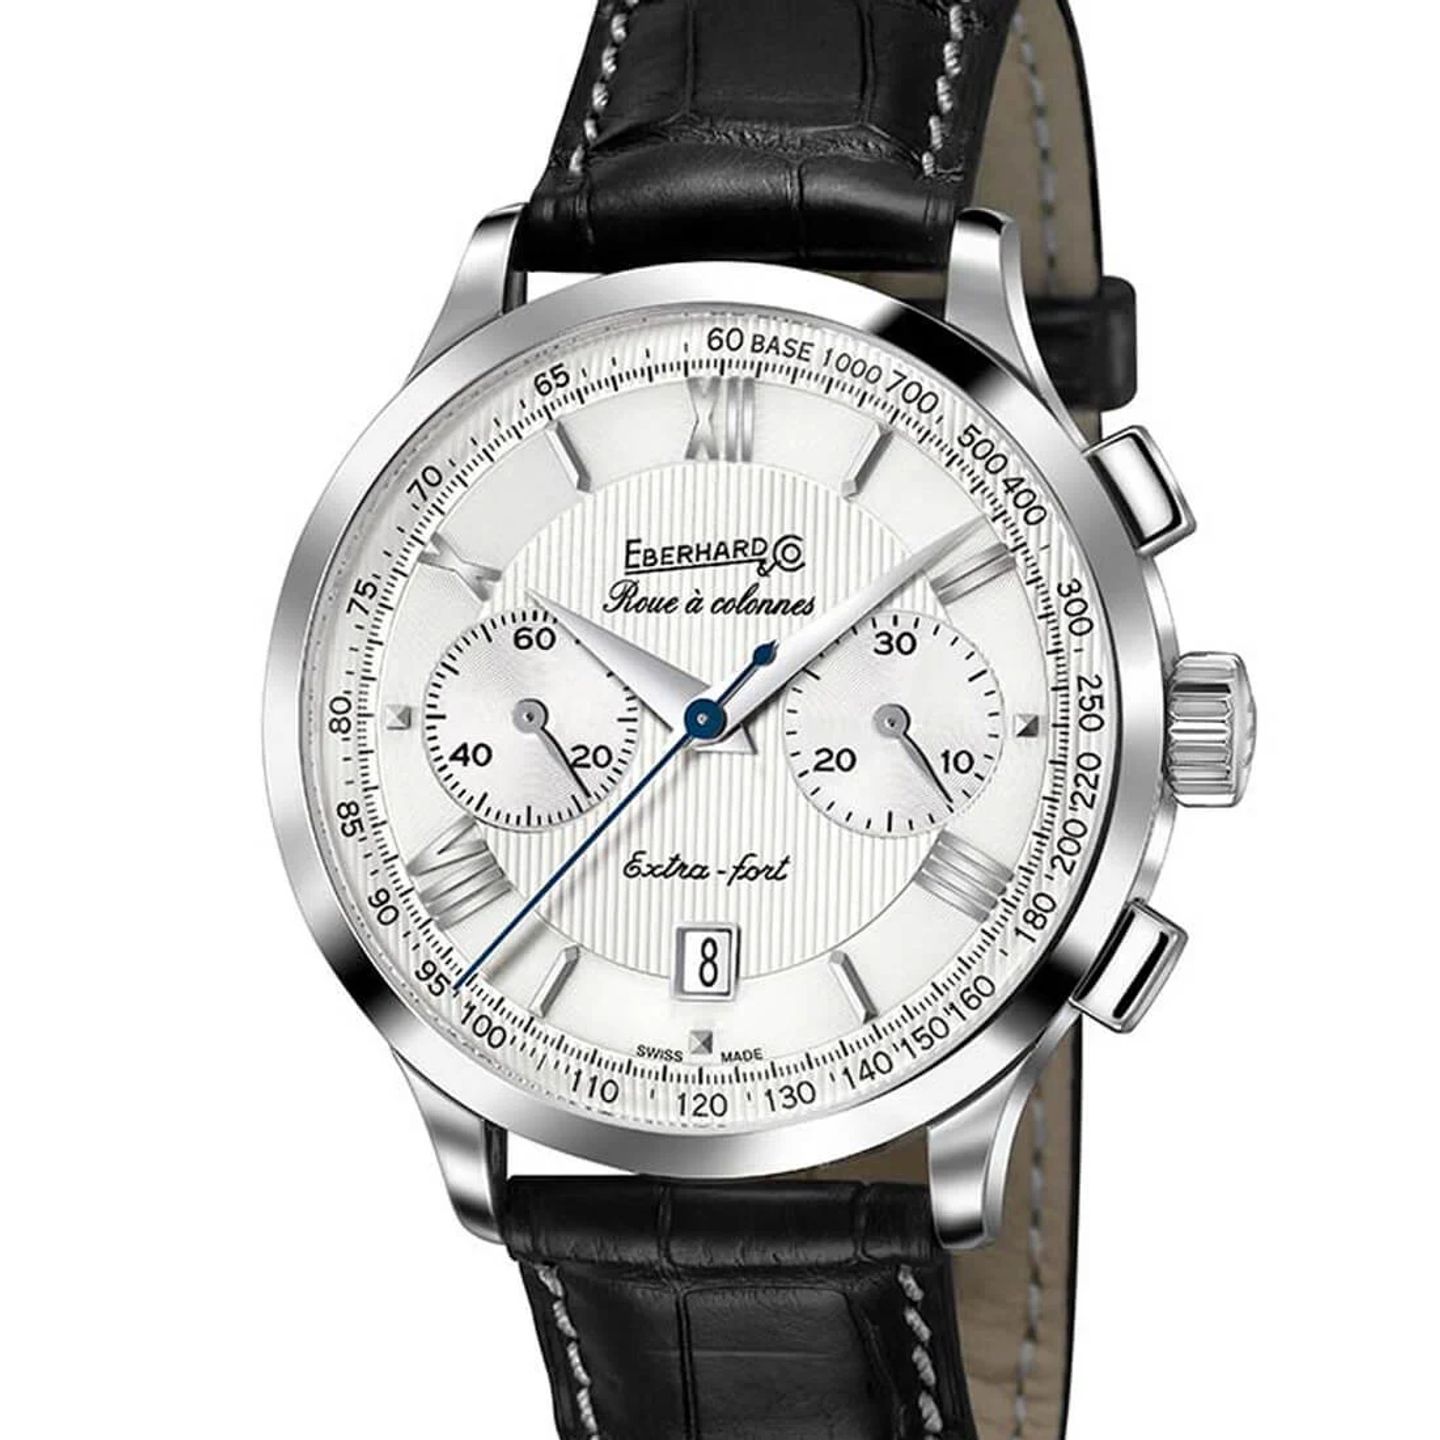 Eberhard & Co. Extra-Fort 31956.4 CP - (1/3)